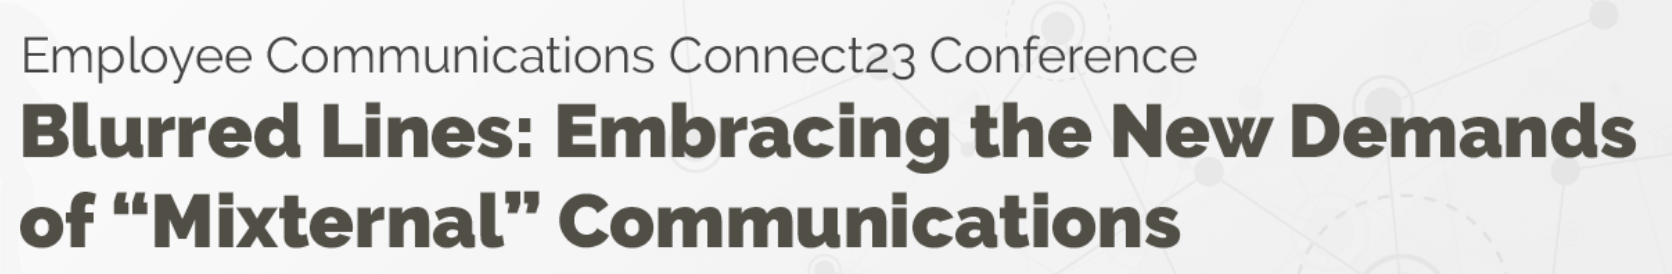 Banner ad for PRSA employee communications connect23 conference